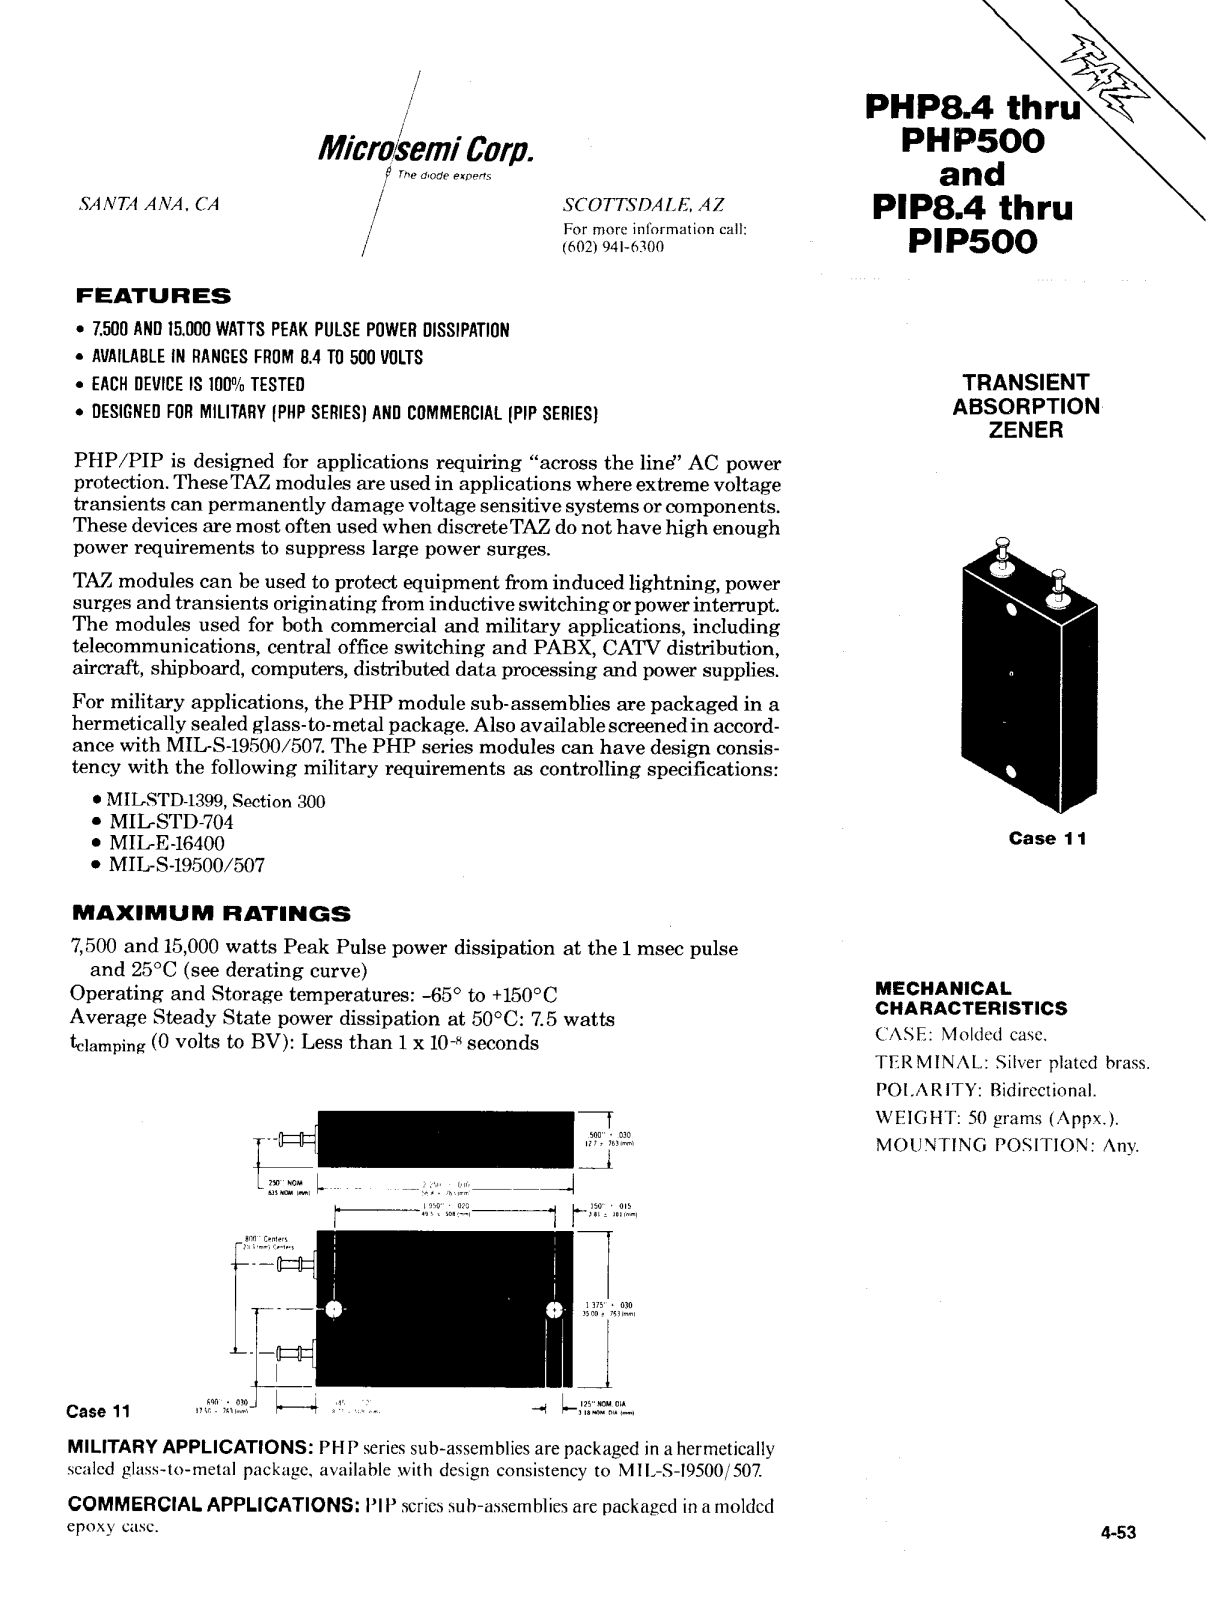 Microsemi Corporation PHP24, PHP250, PHP208, PHP120, PHP30 Datasheet